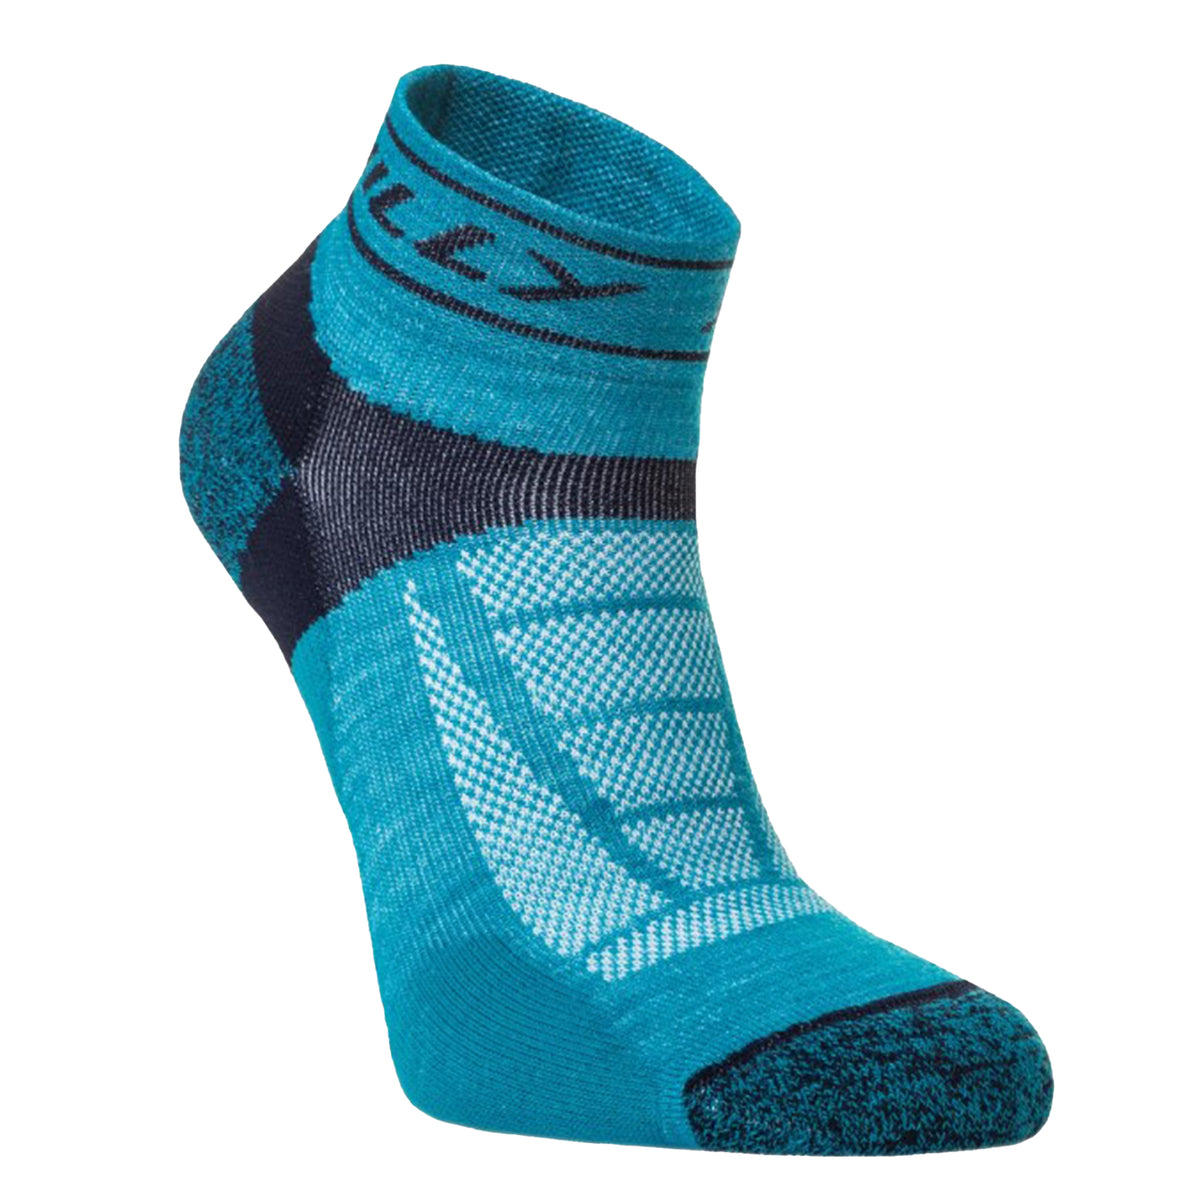 Hilly Trail QUnder Armourrter: Turquoise/Navy